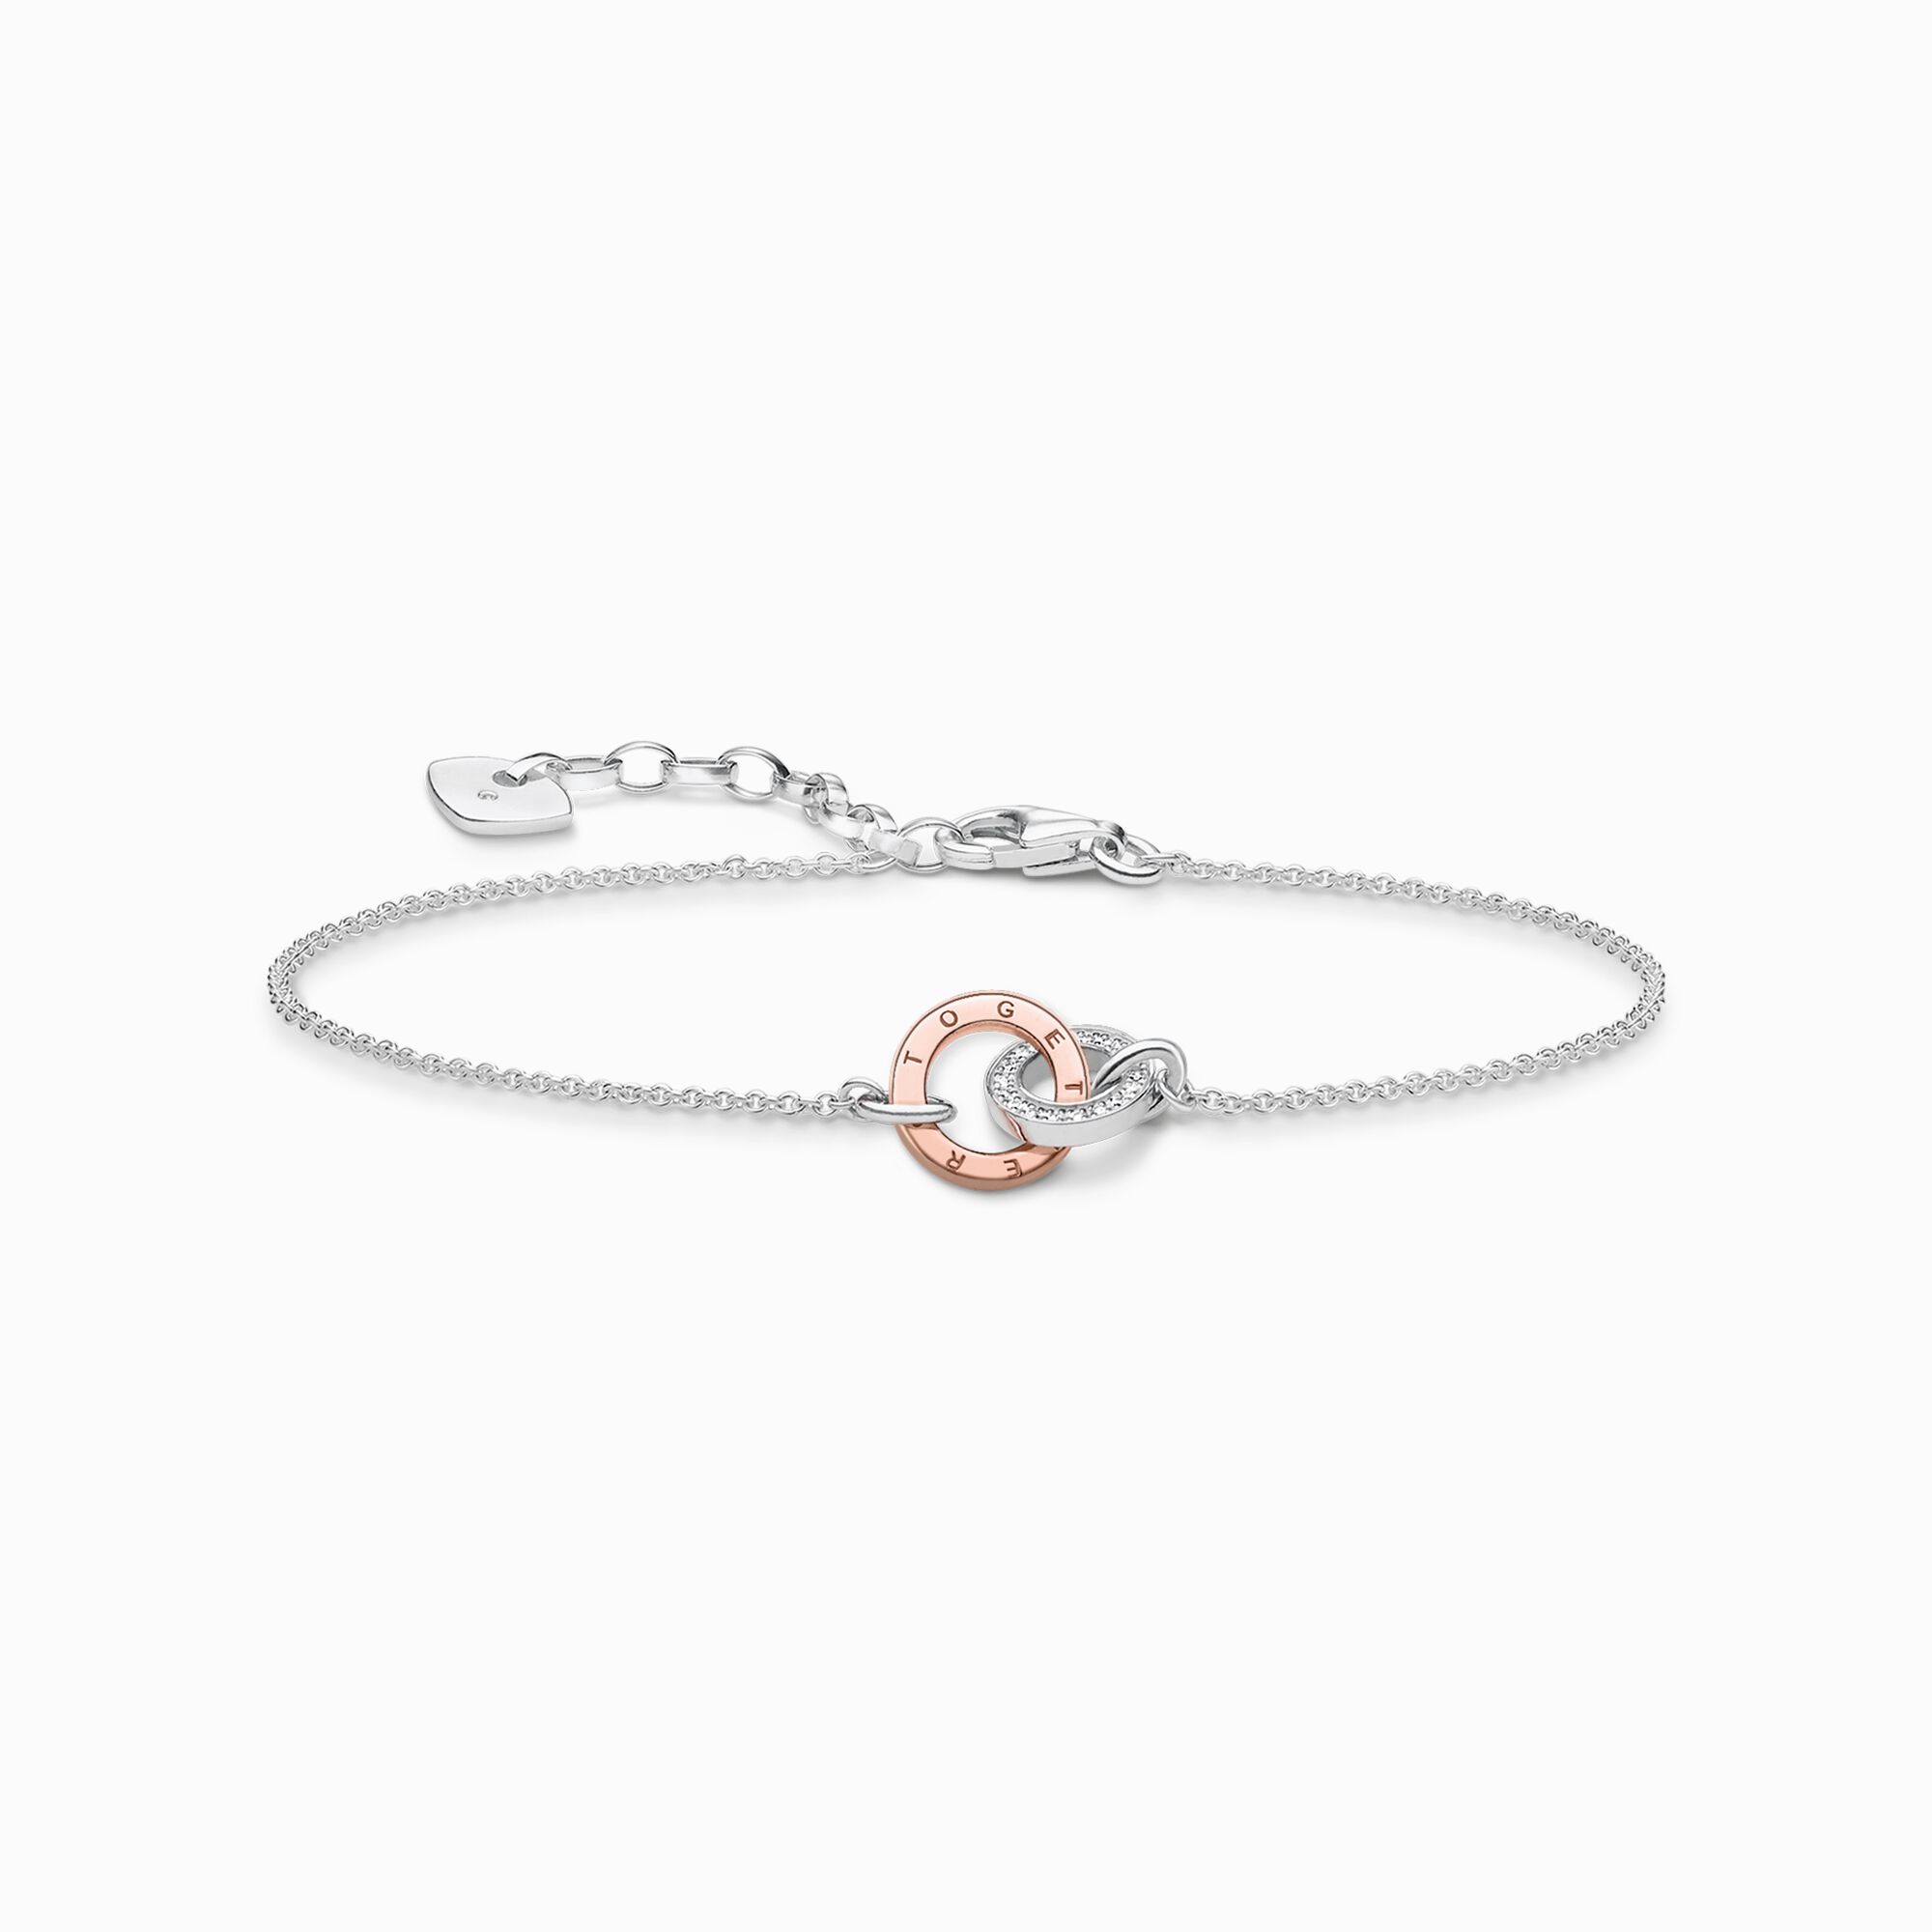 Bracelet Together from the  collection in the THOMAS SABO online store